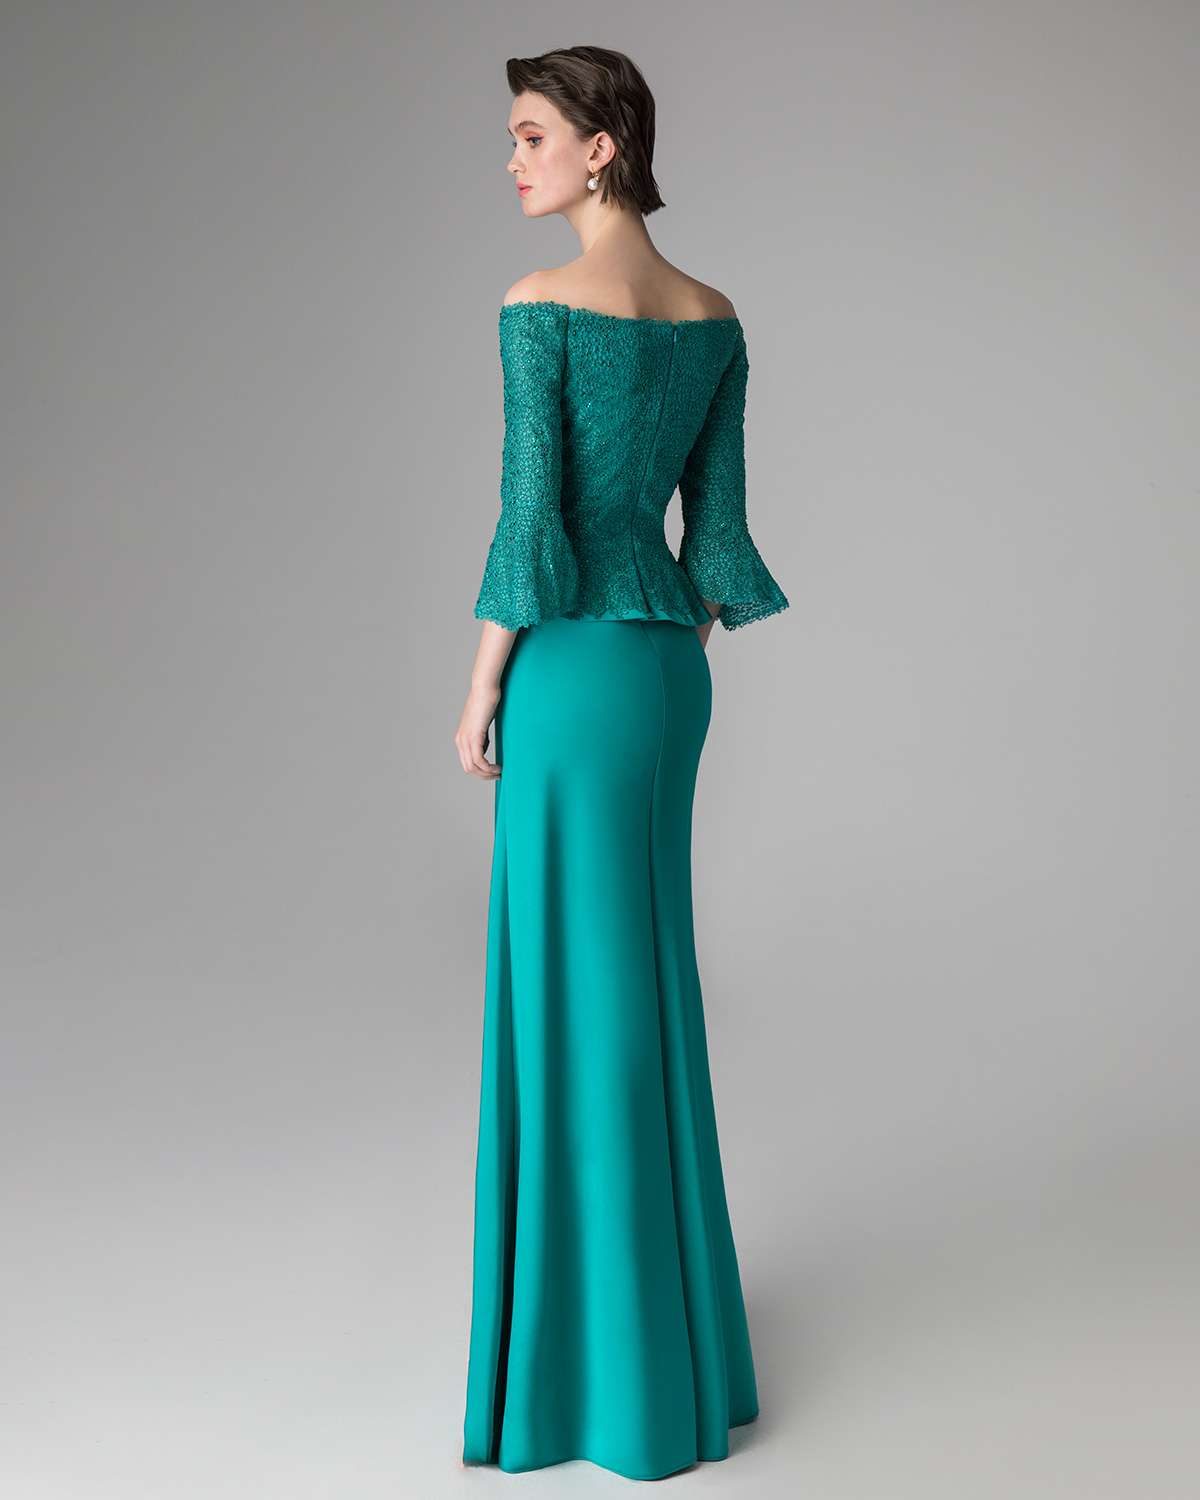 Classic Dresses / Long evening dress with lace top and long sleeves